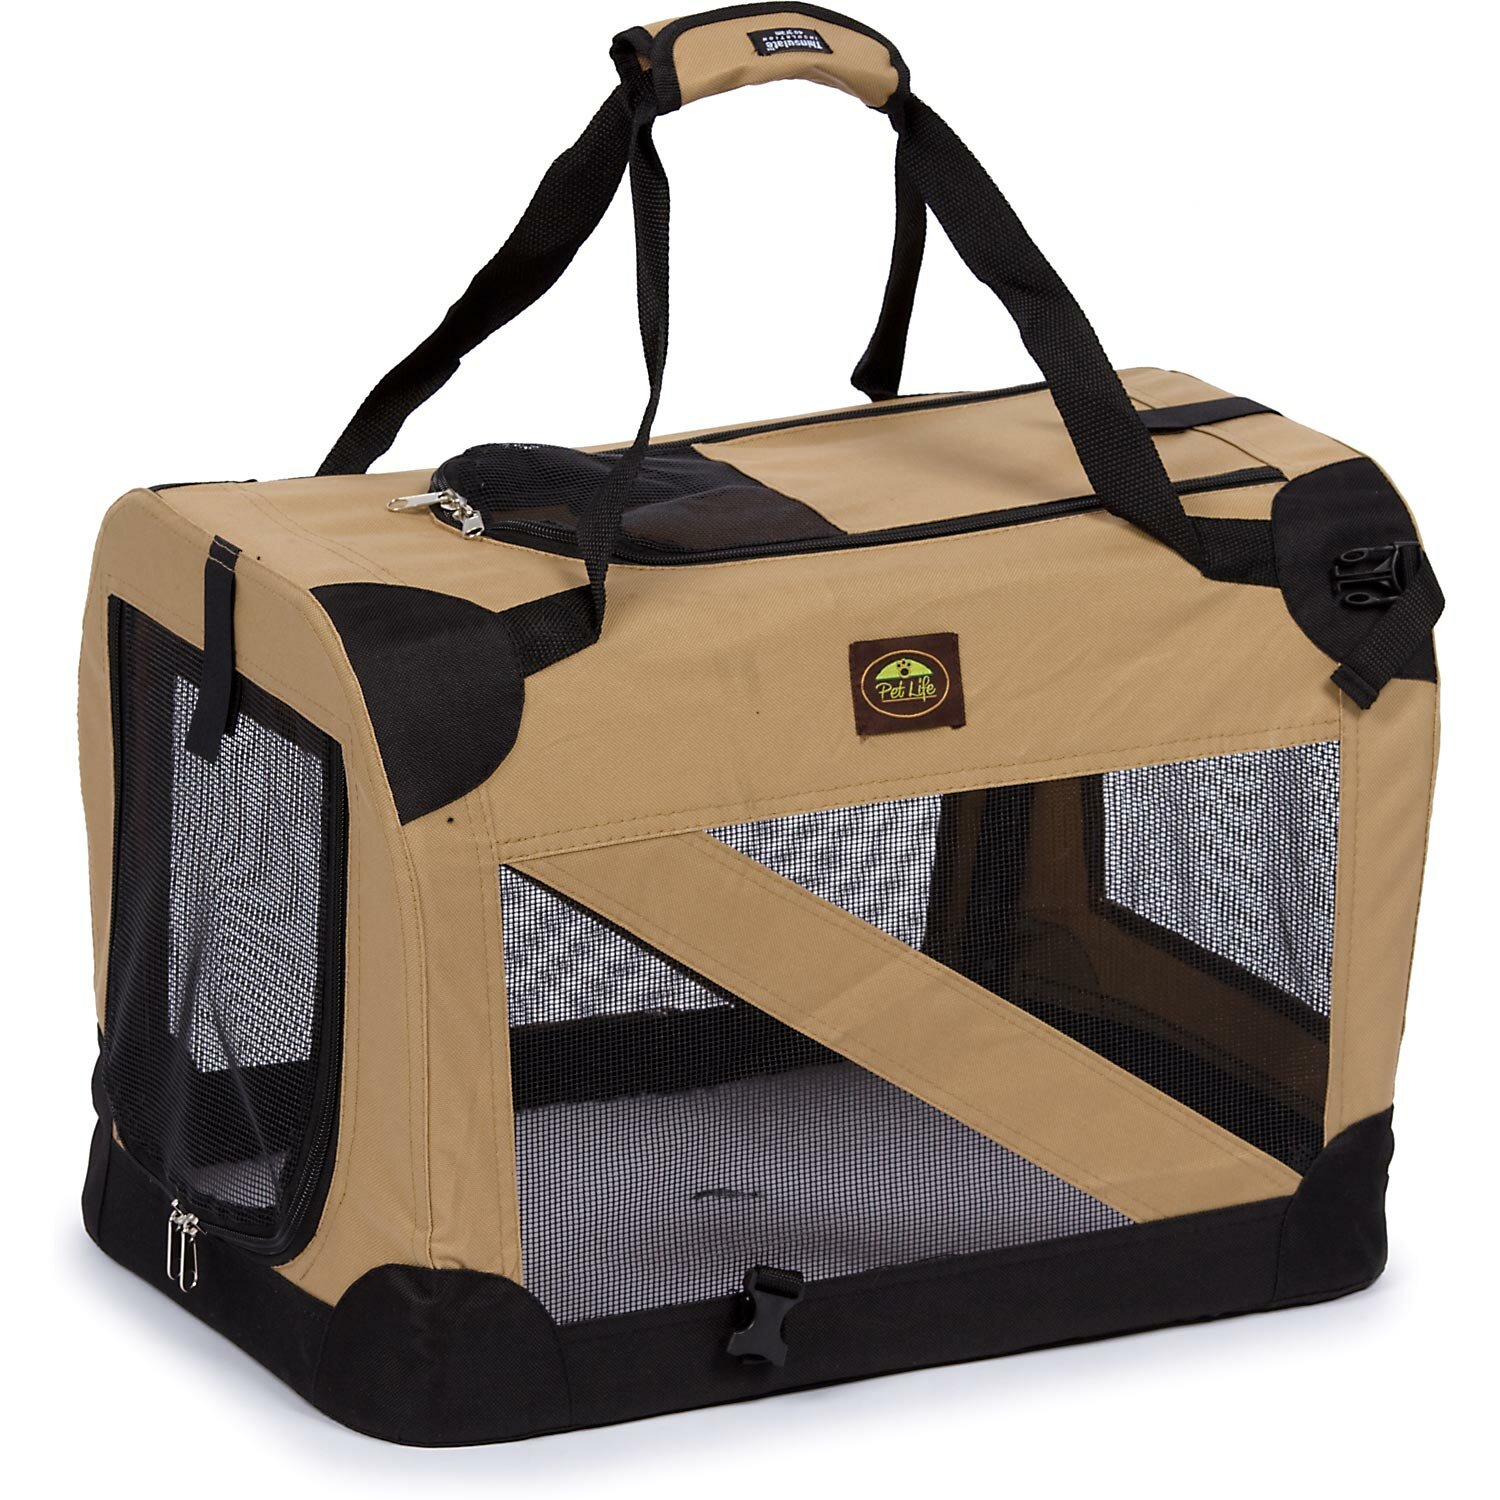 Classic Pet Carriers Dogs Bags Luxury Oxford Outdoor Cats Puppies